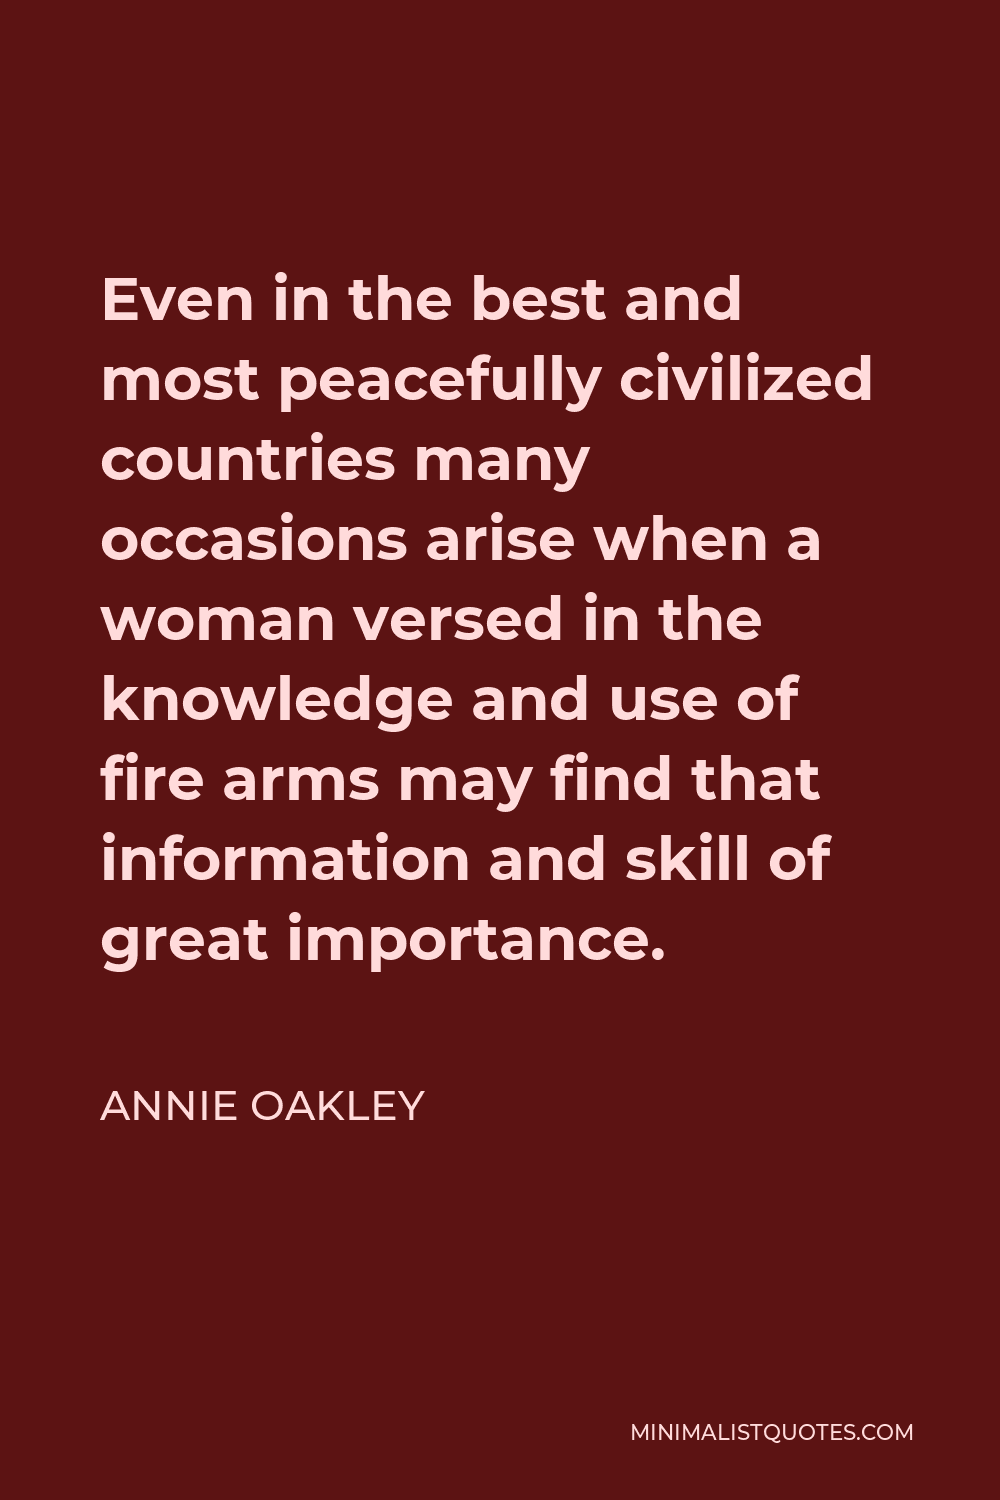 Annie Oakley Quote - Even in the best and most peacefully civilized countries many occasions arise when a woman versed in the knowledge and use of fire arms may find that information and skill of great importance.